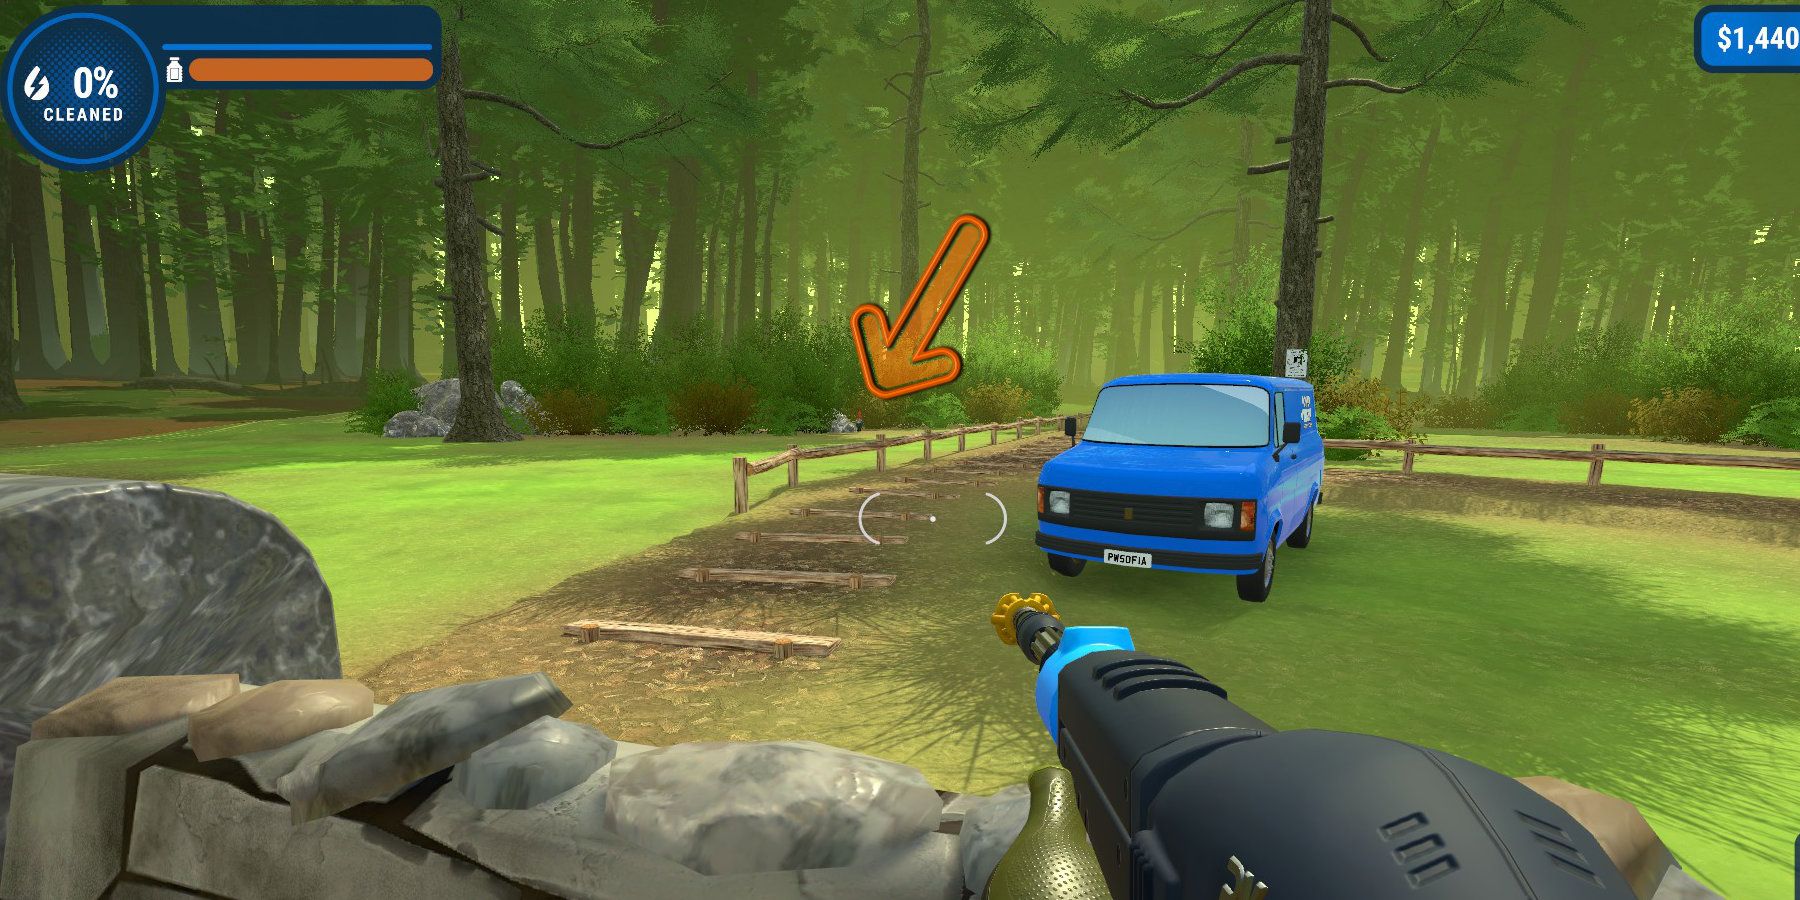 A garden gnome hiding in some bushes in the distance of a forest, highlighted by an arrow.